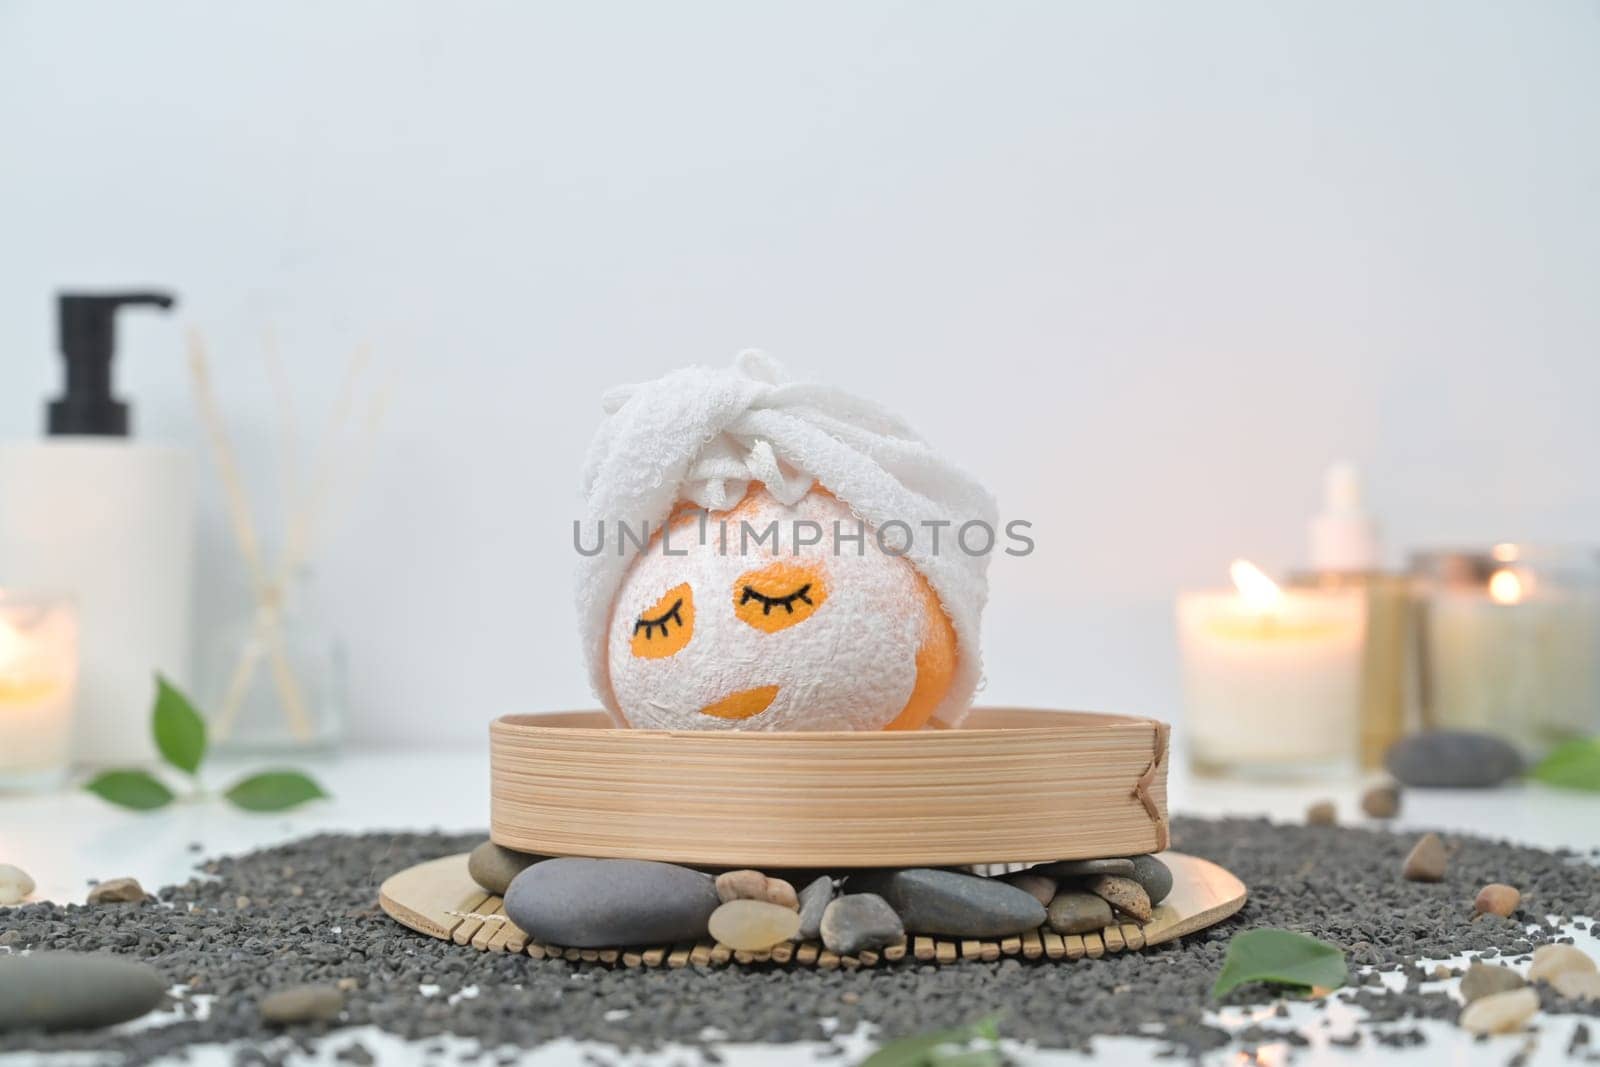 Orange fruits in face mask, zen stones, candles and green leaves on white background. Spa treatment and self care concept by prathanchorruangsak